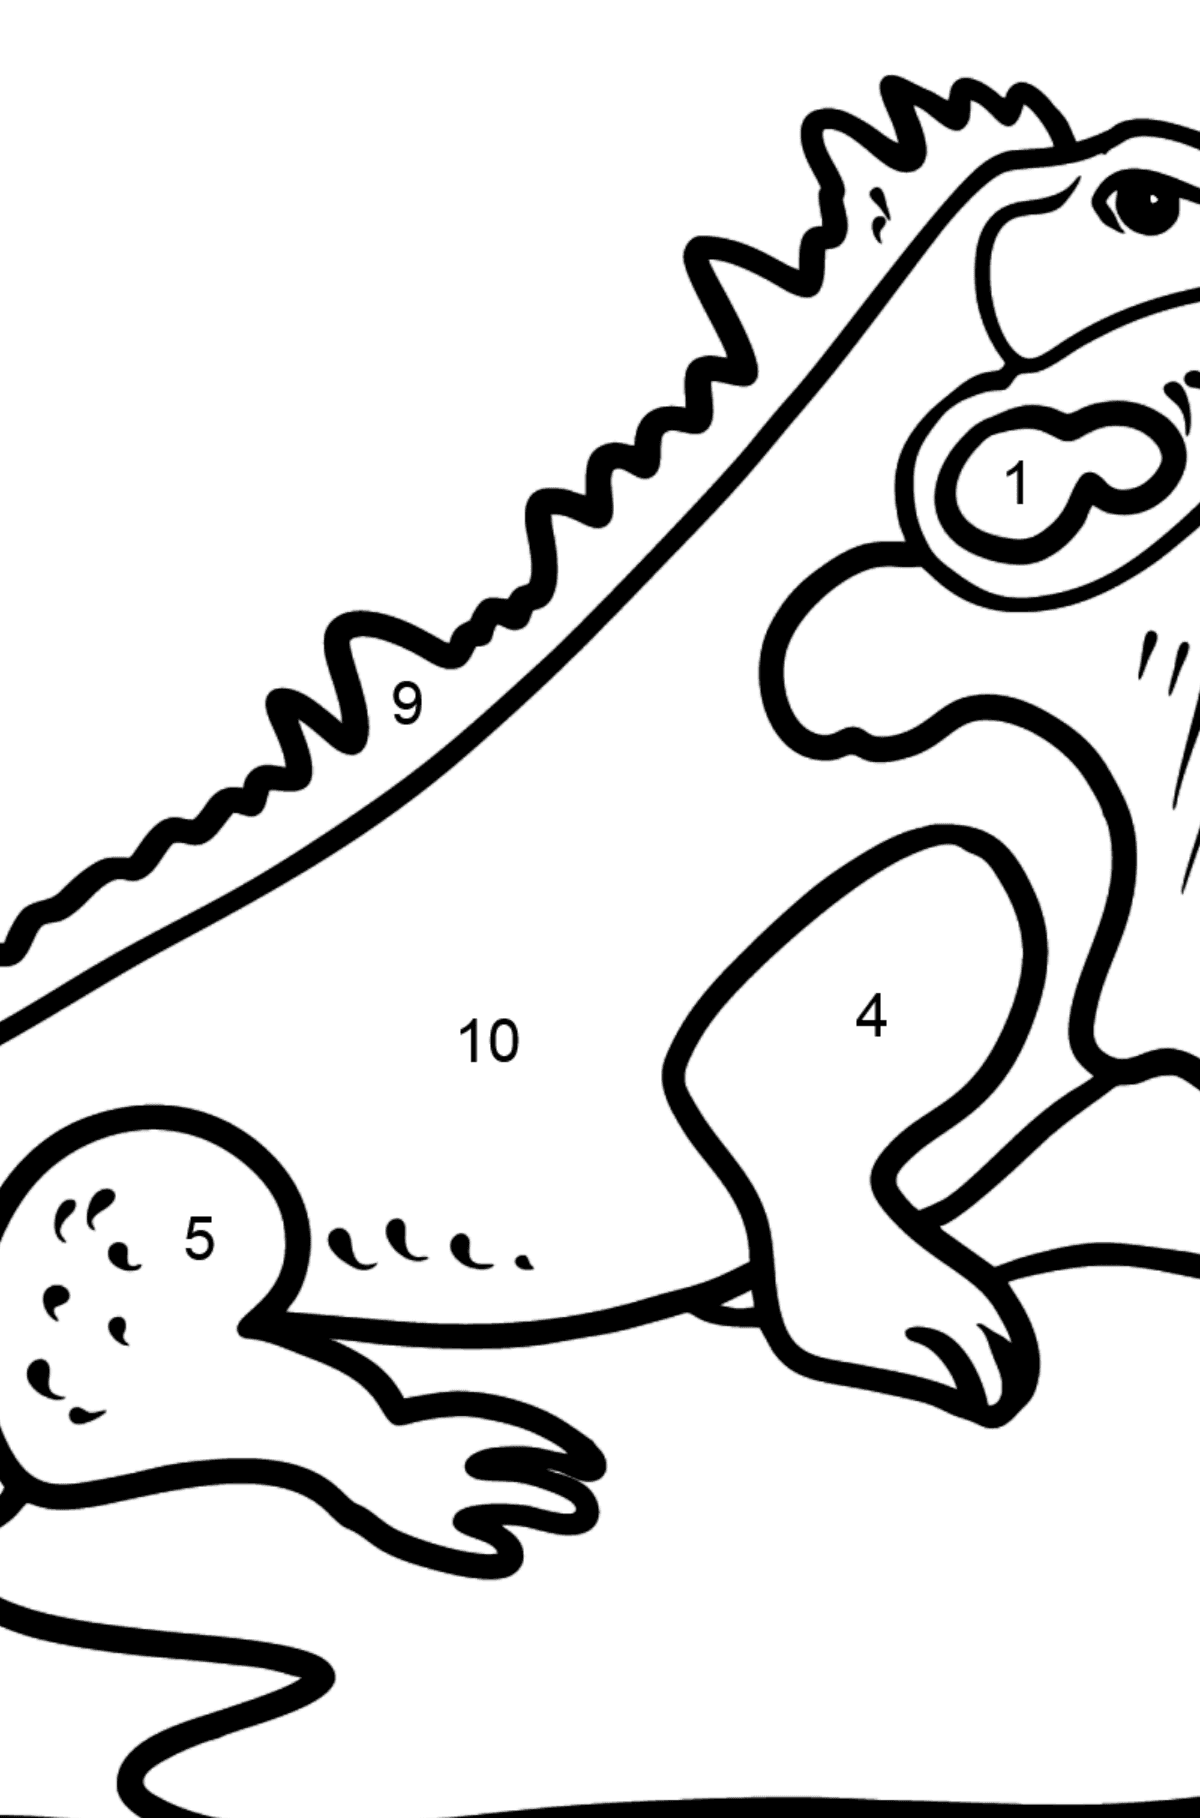 Portuguese Letter I coloring pages - IGUANA - Coloring by Numbers for Kids